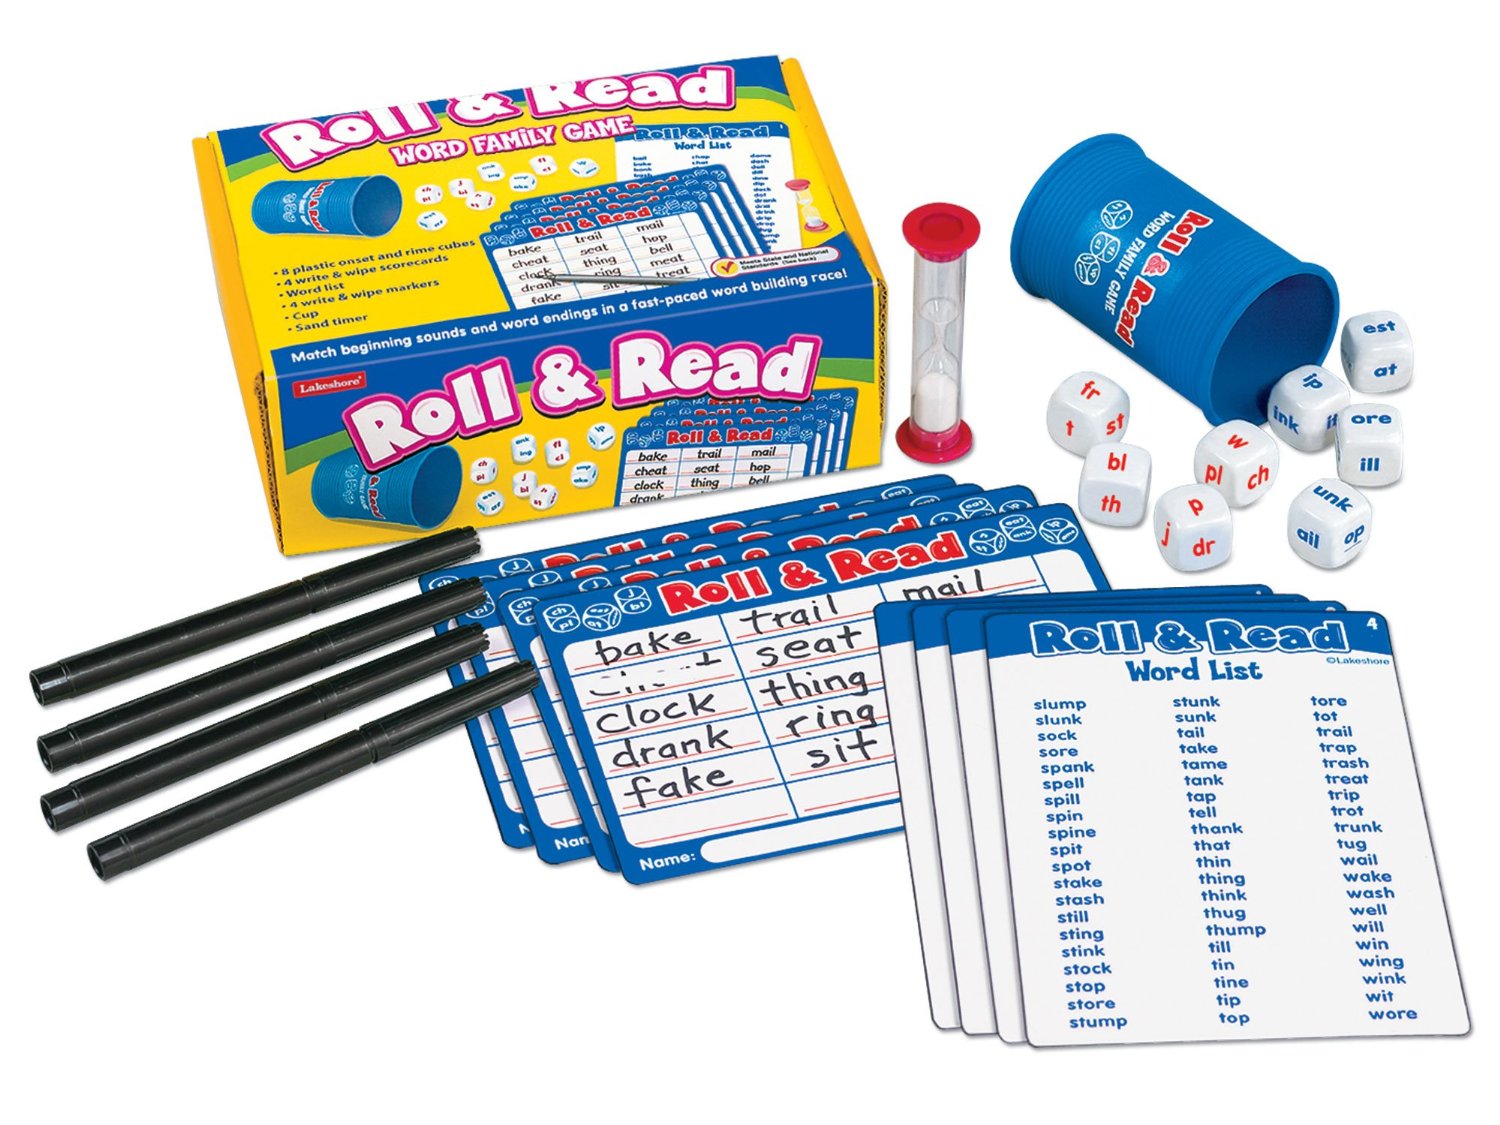 This Roll and Read Word Family Game includes fun dice to match beginning sounds and word families to form words.